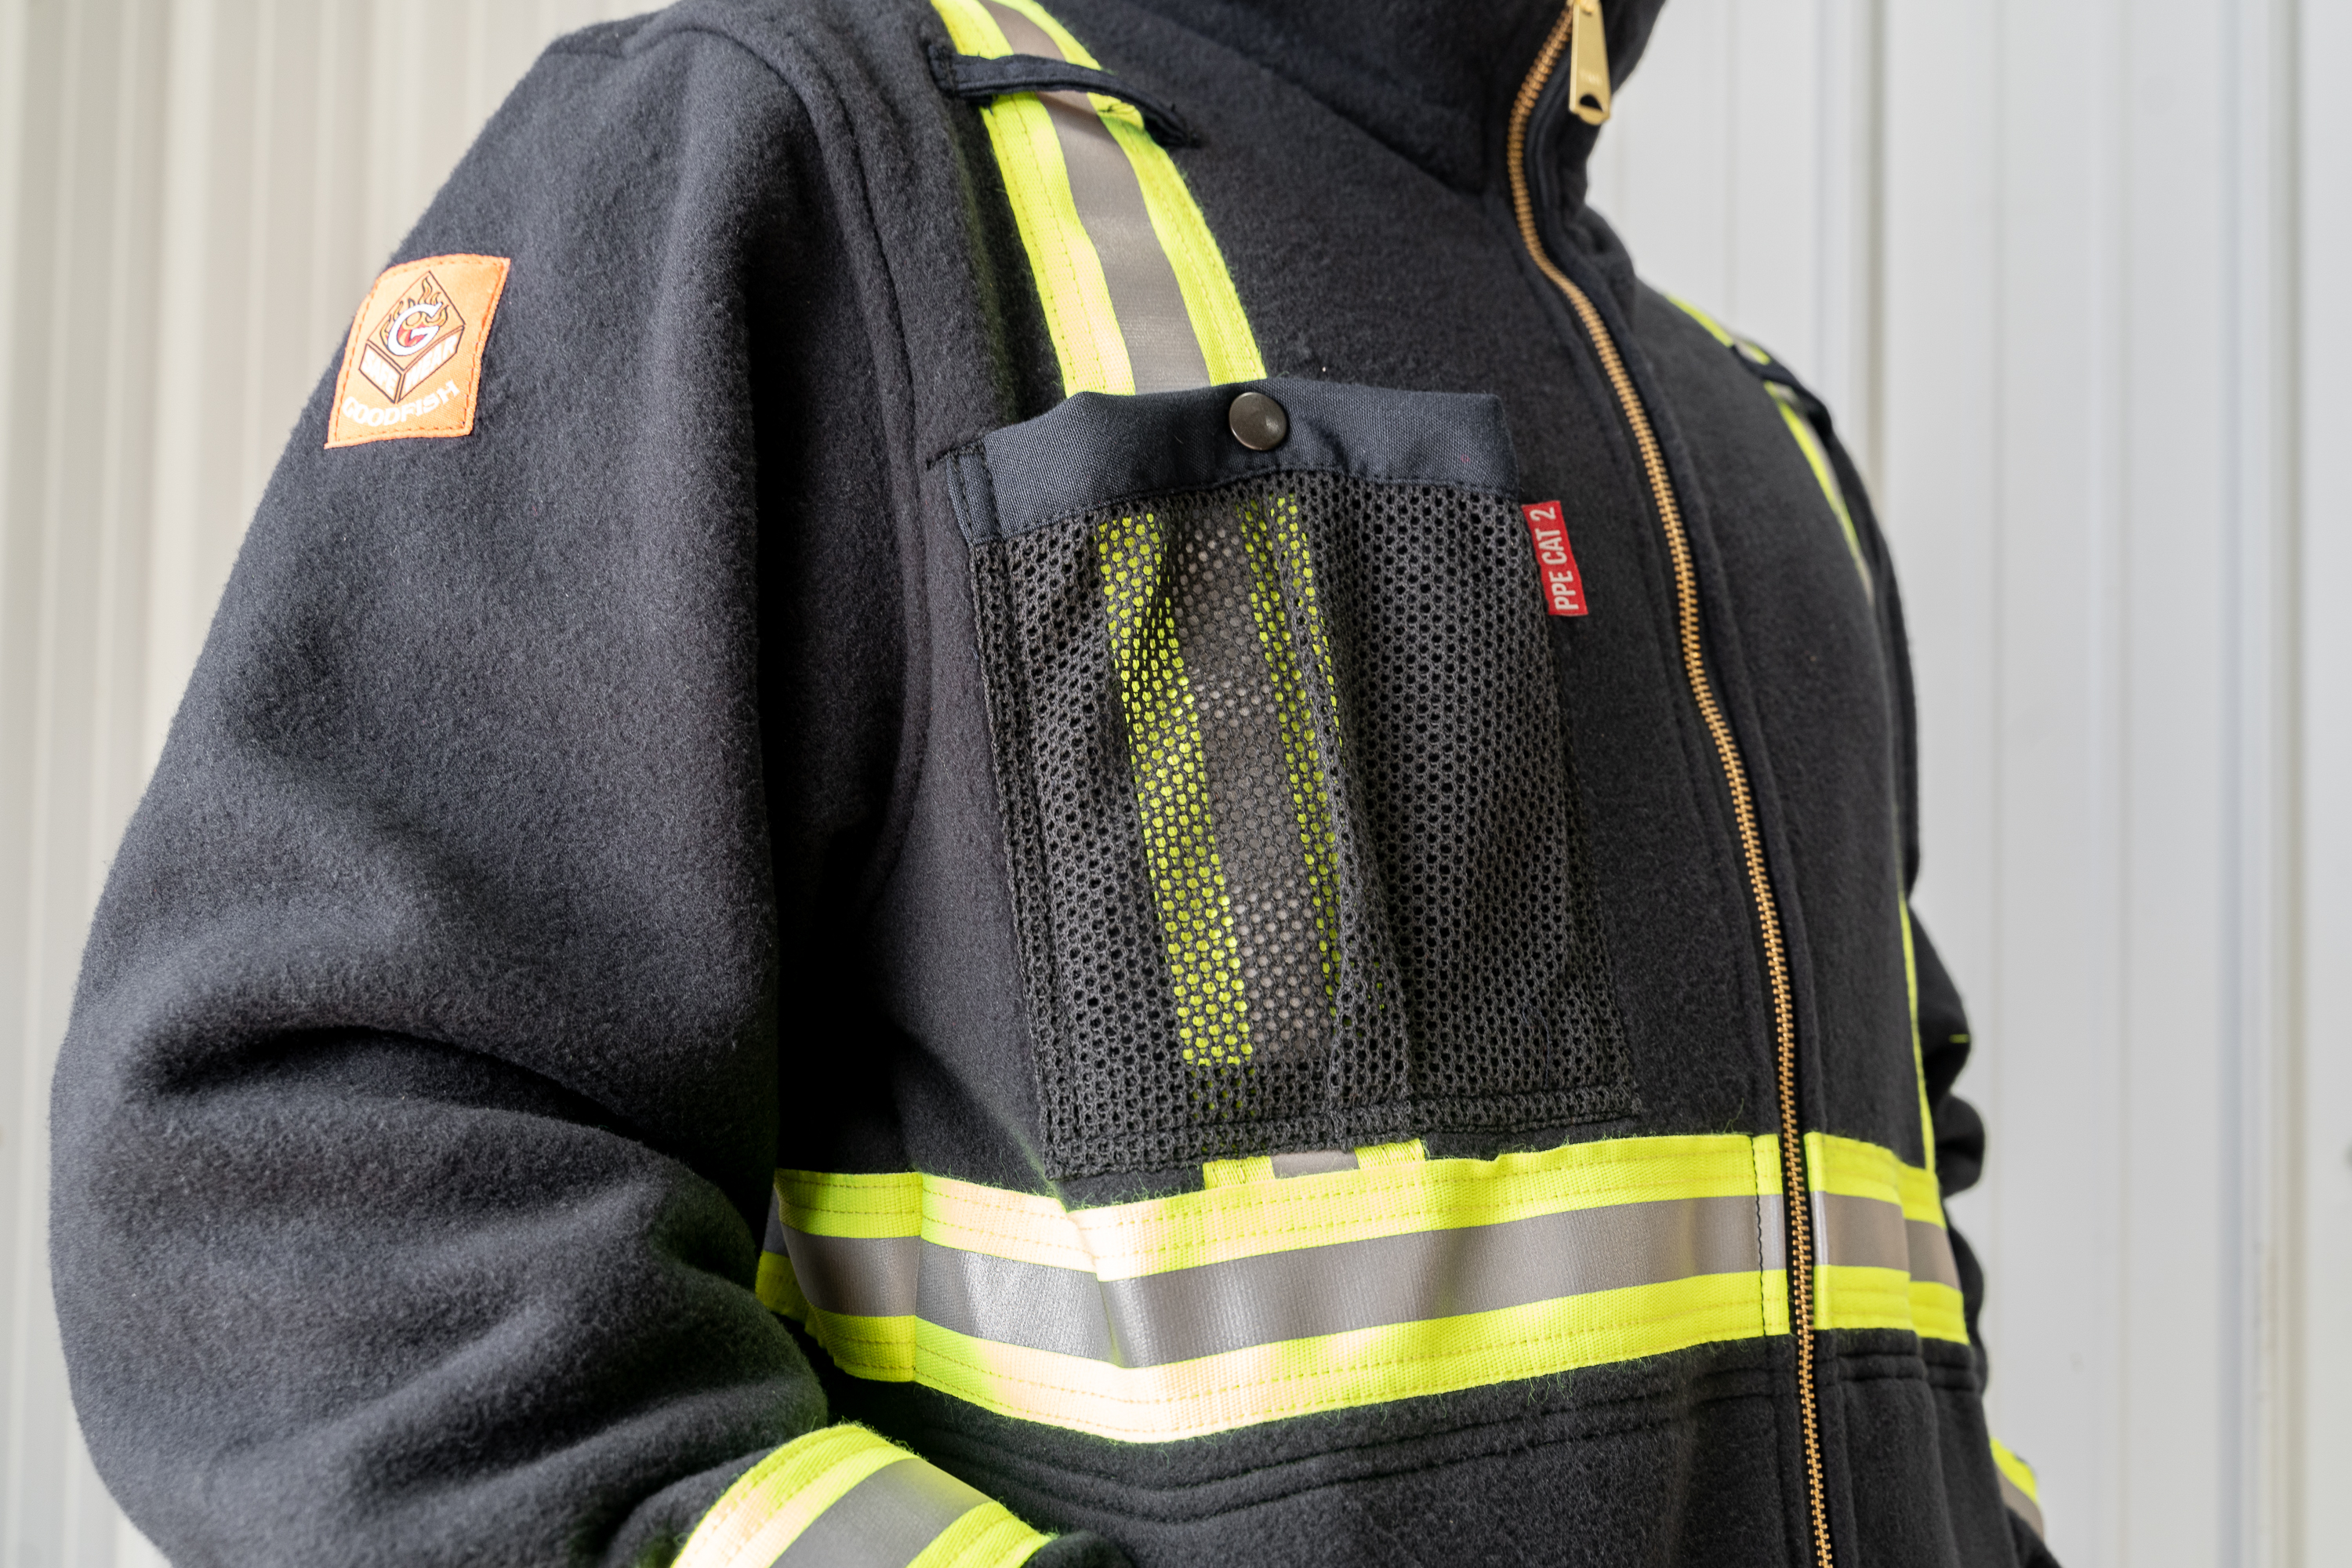 PPE workwear is commonplace in several industries